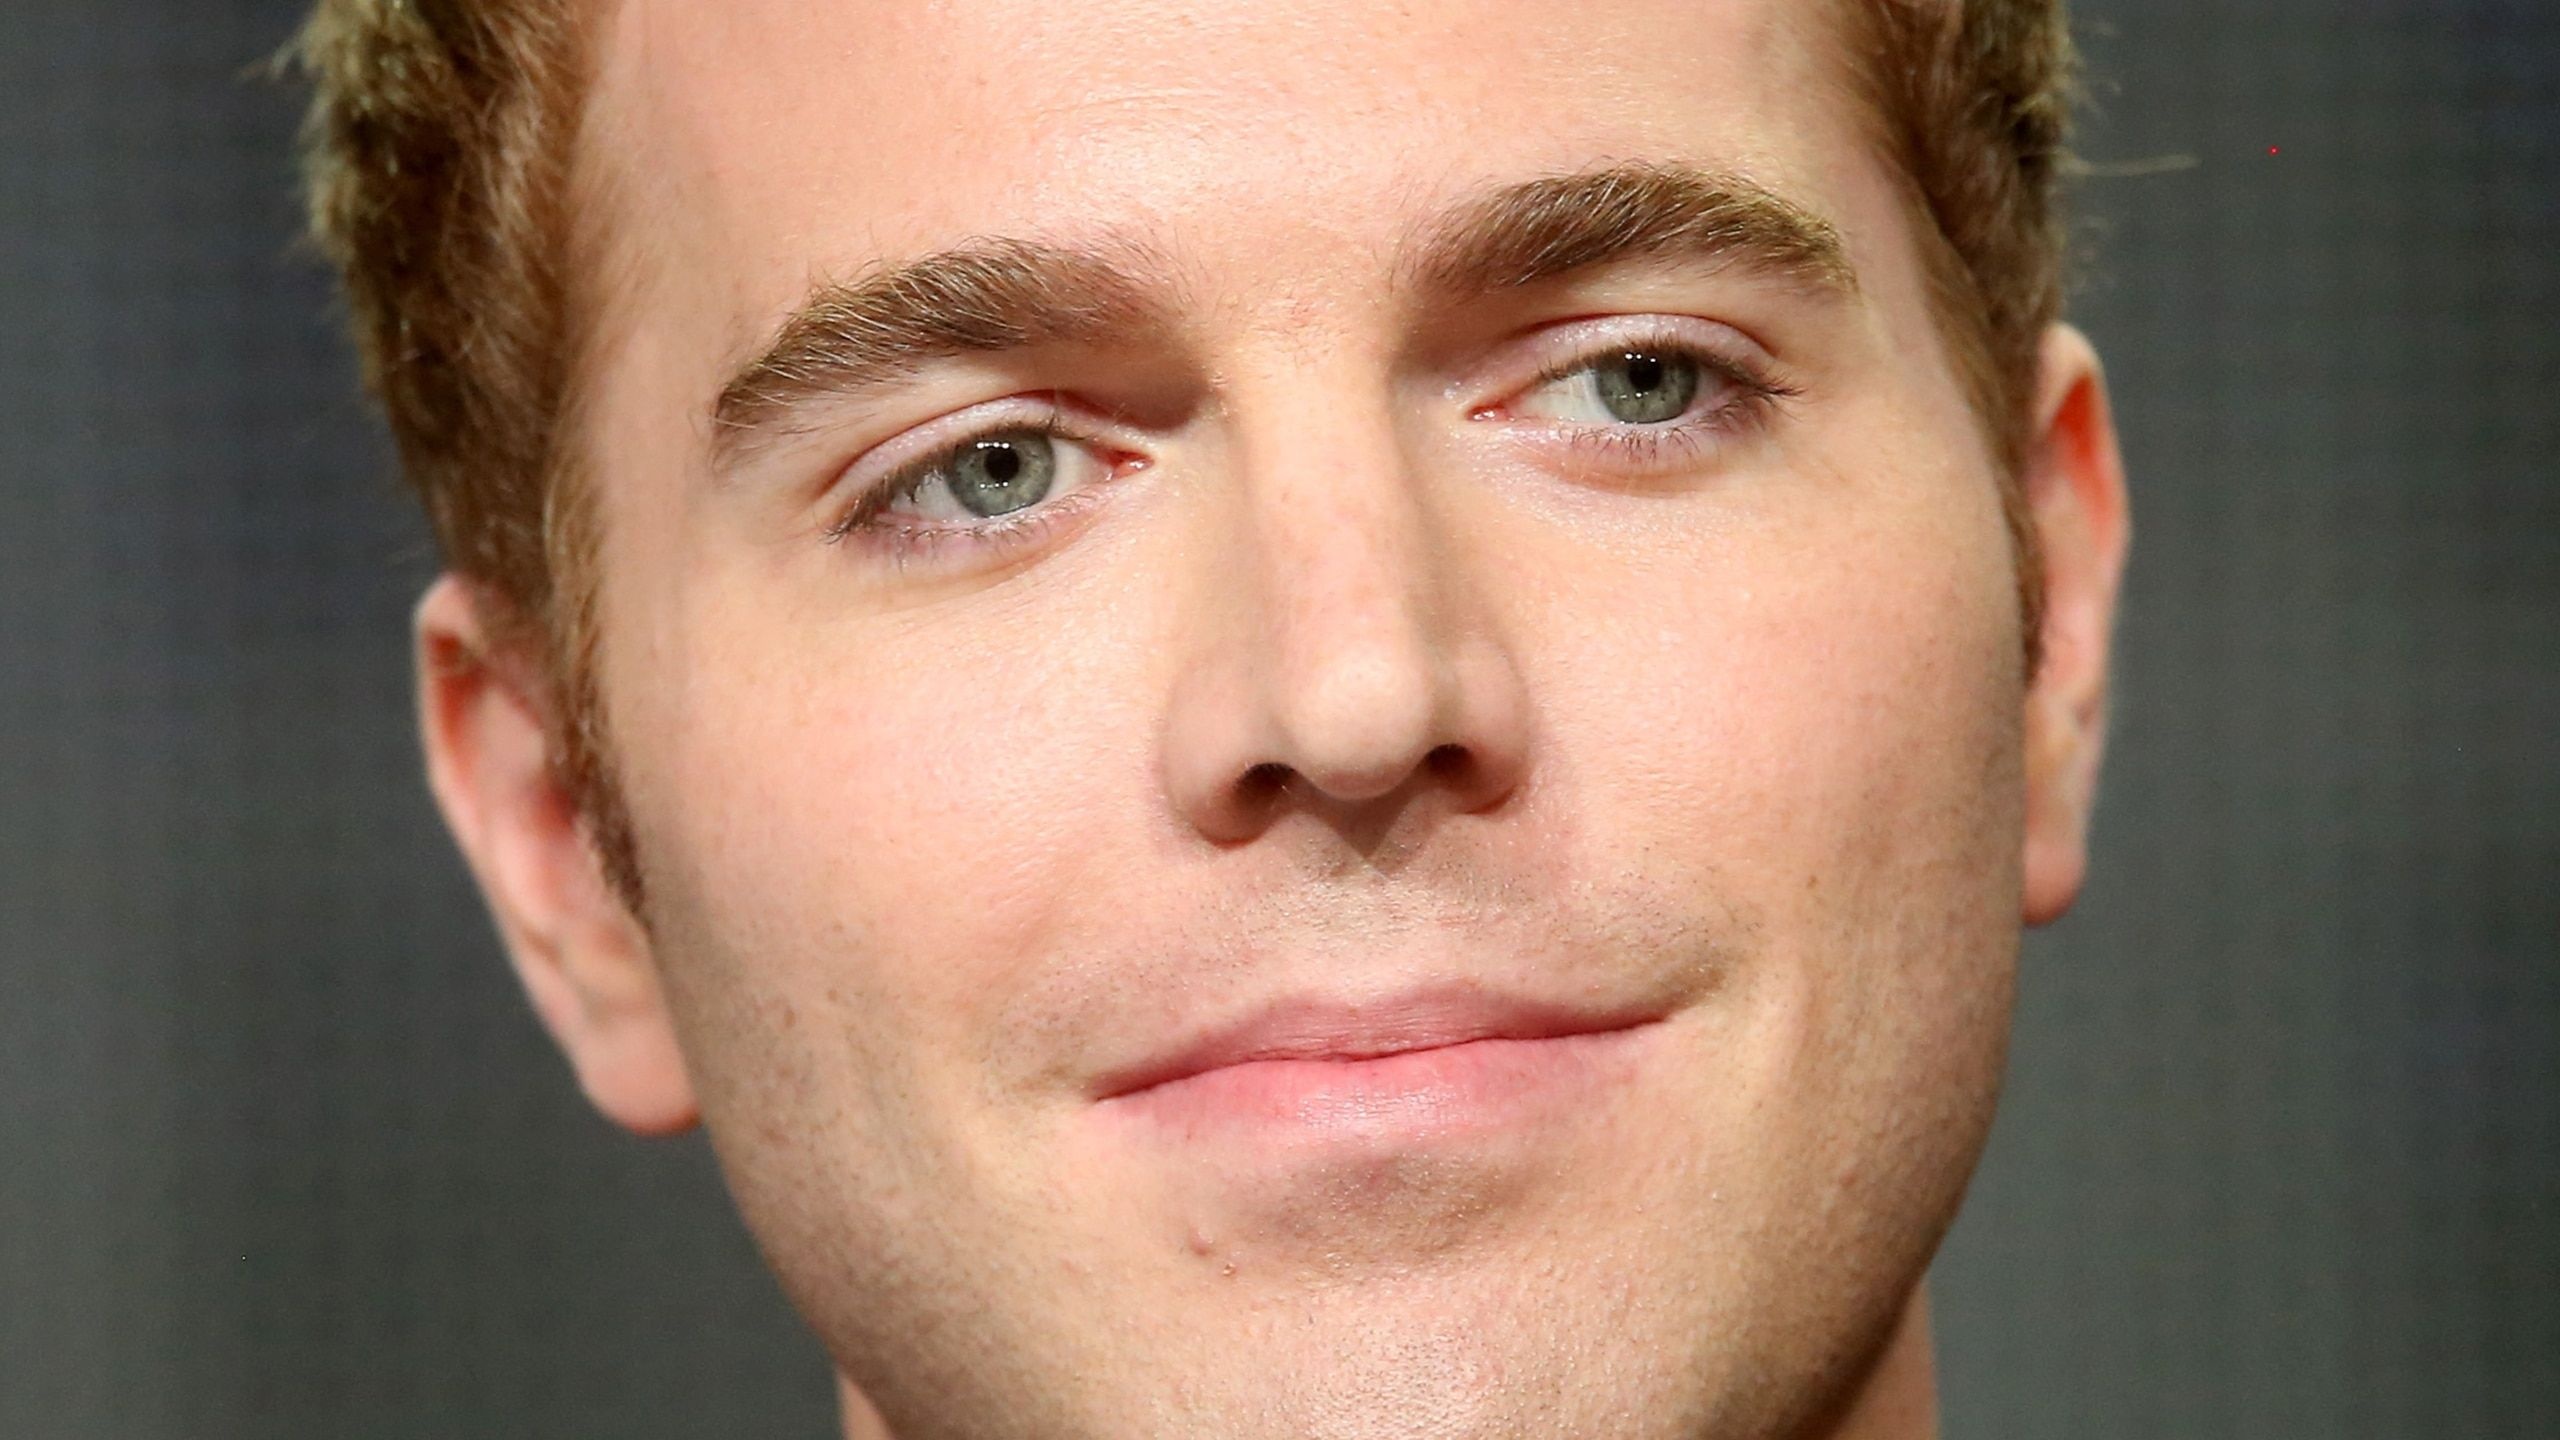 Shane Dawson, Wallpapers, Free backgrounds, Other, 2560x1440 HD Desktop